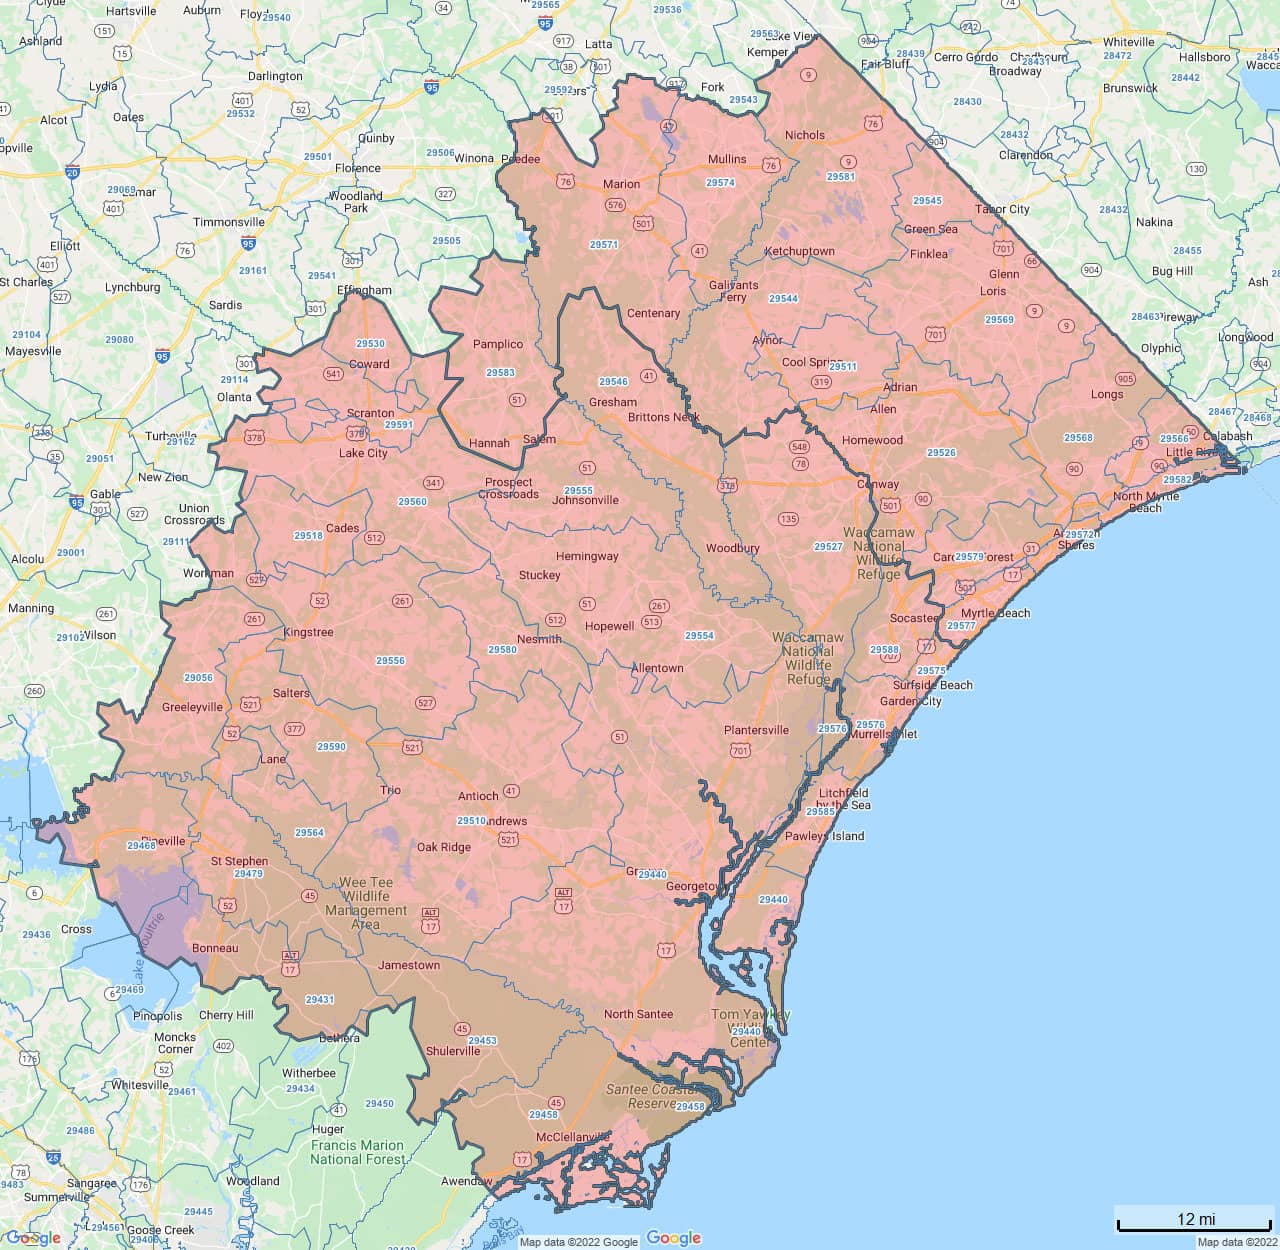 All Dry Services Area Coverage Map for Greater Myrtle Beach, SC